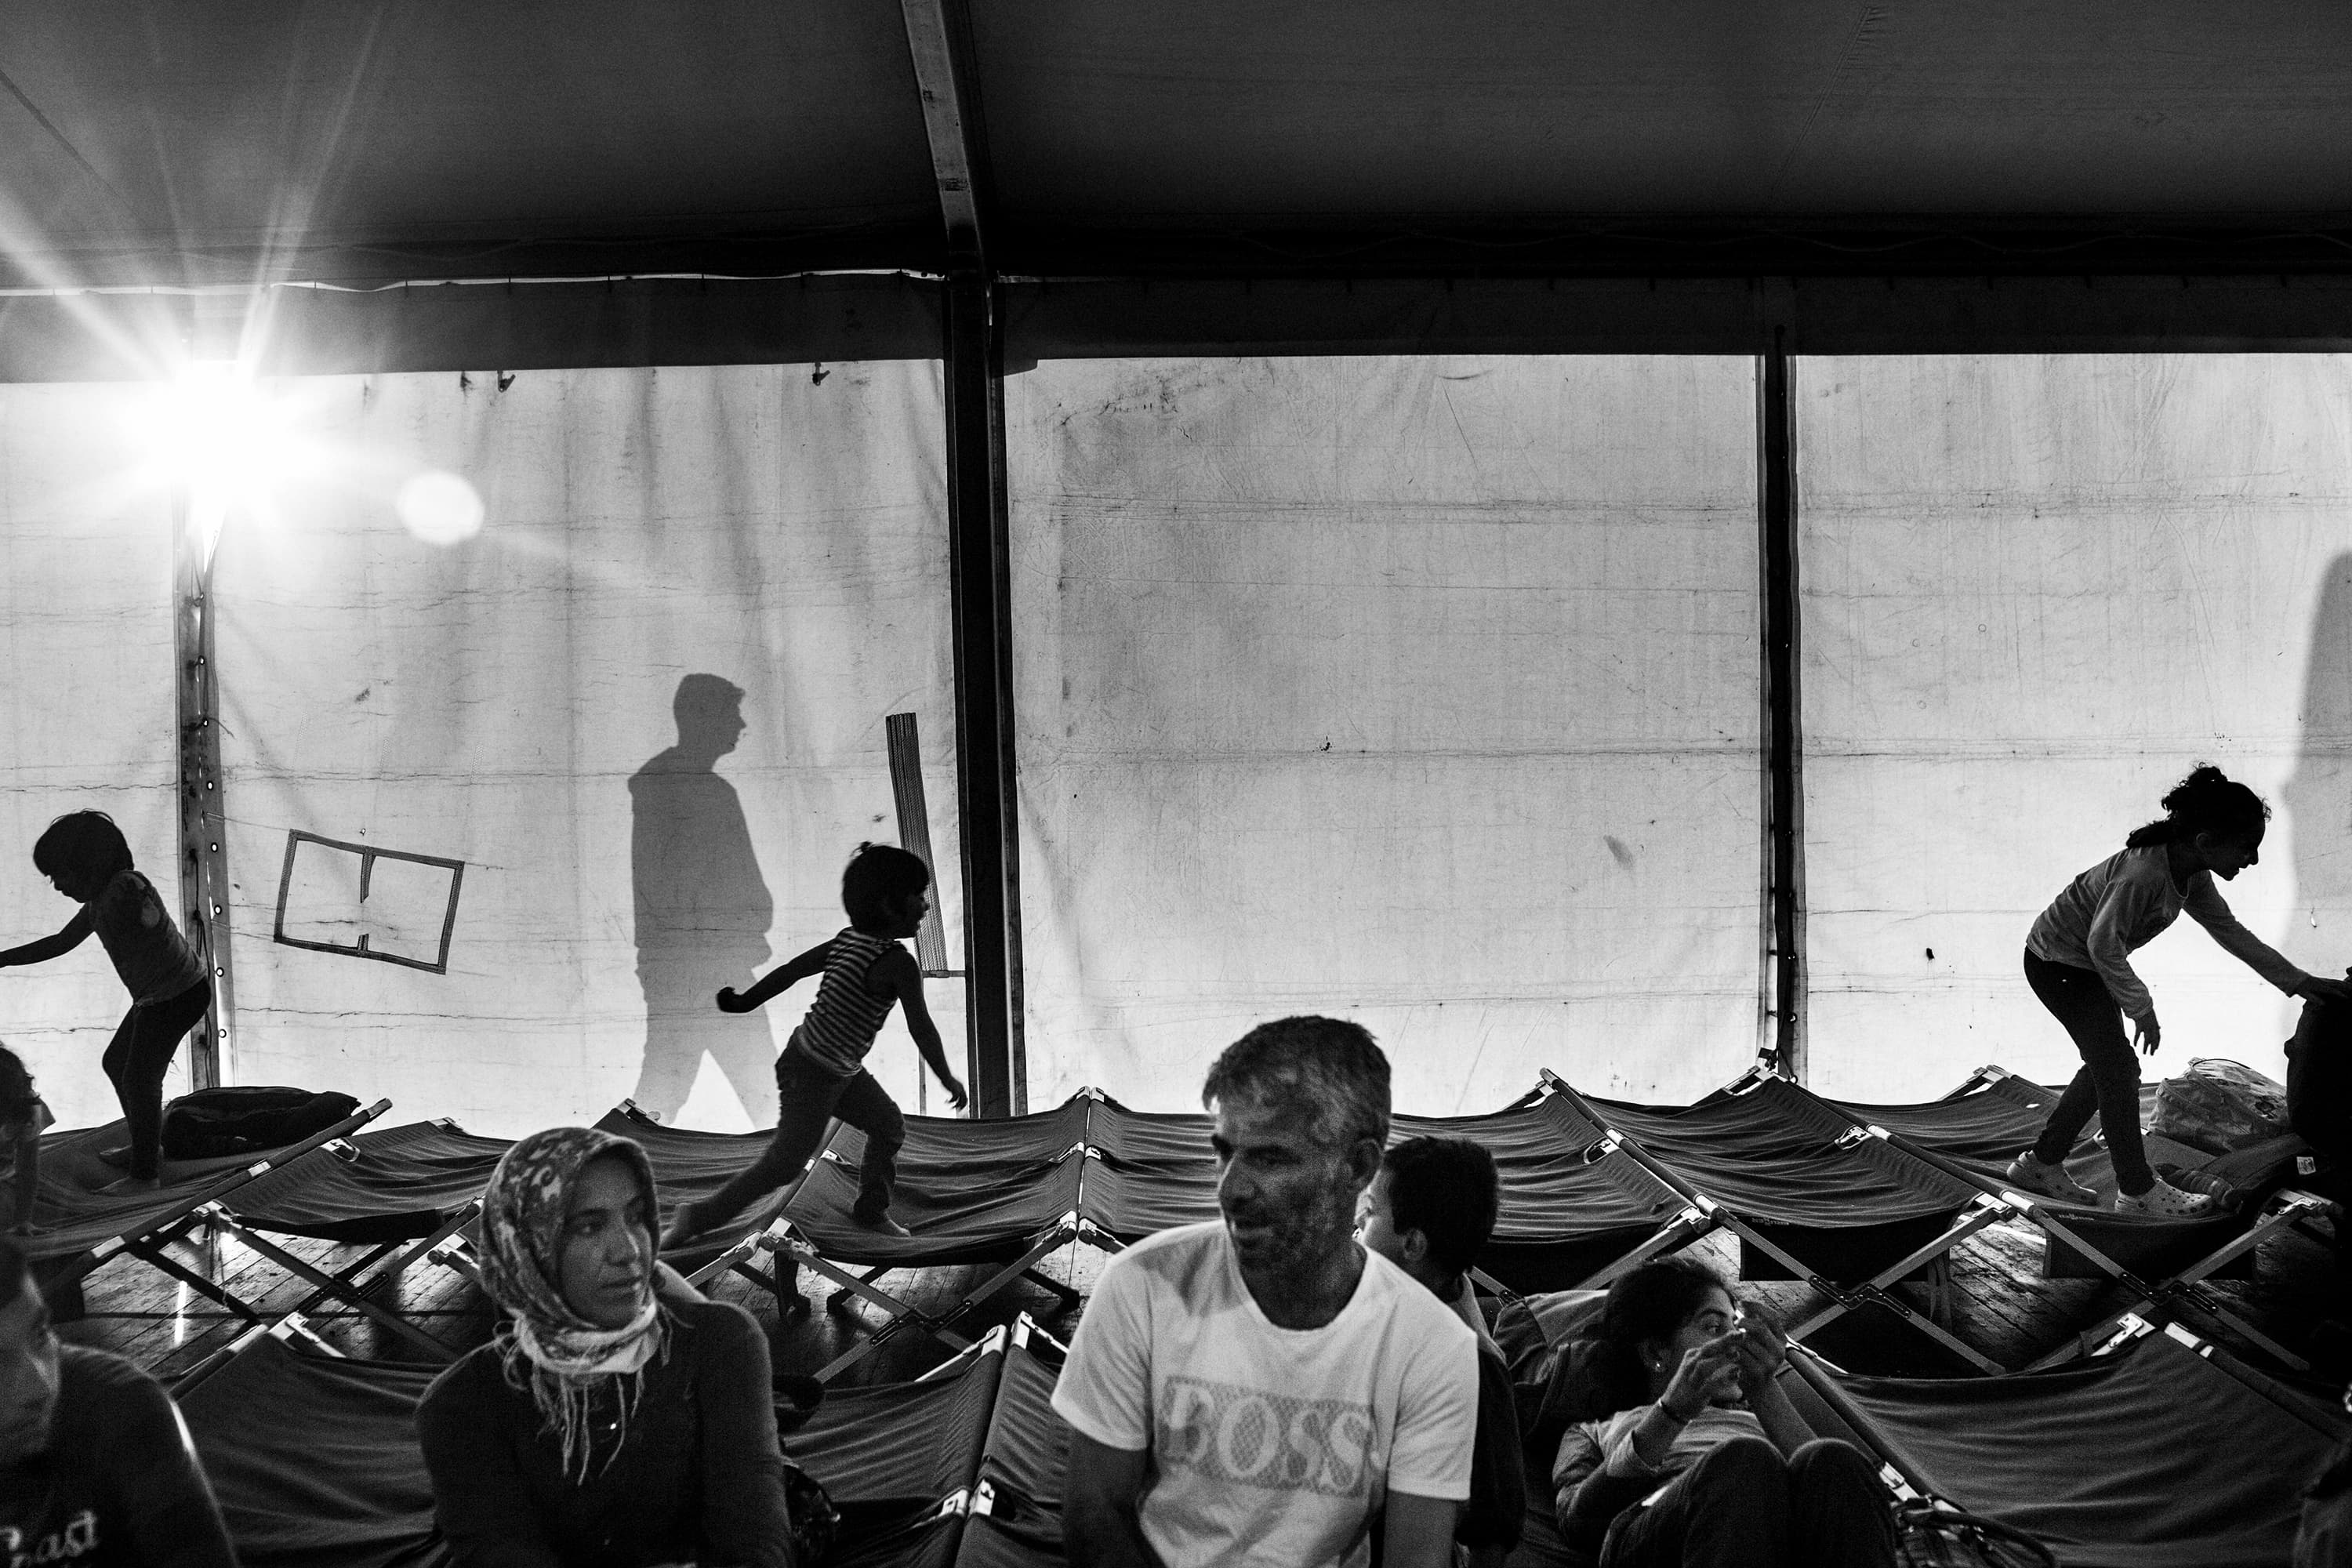 Syrian refugee children play in the reception tent at the dock of the city of Augusta (Italy) after having been registered by the Italian authorities on June 10, 2015. On June 10th 2015, 210 Syrian refugees disembarked at the Sicilian port of Augusta. They left from Mersin in Turkey and spent five days at sea without food or water before being rescued by the Belgian navy. The number of refugees and migrants taking the dangerous journey across the Mediterranean to Europe, fleeing war, hunger and persecution, is increasing more and more. According to UNHCR's data, more than 1,000,000 arrivals by sea were registered in 2015 in Europe